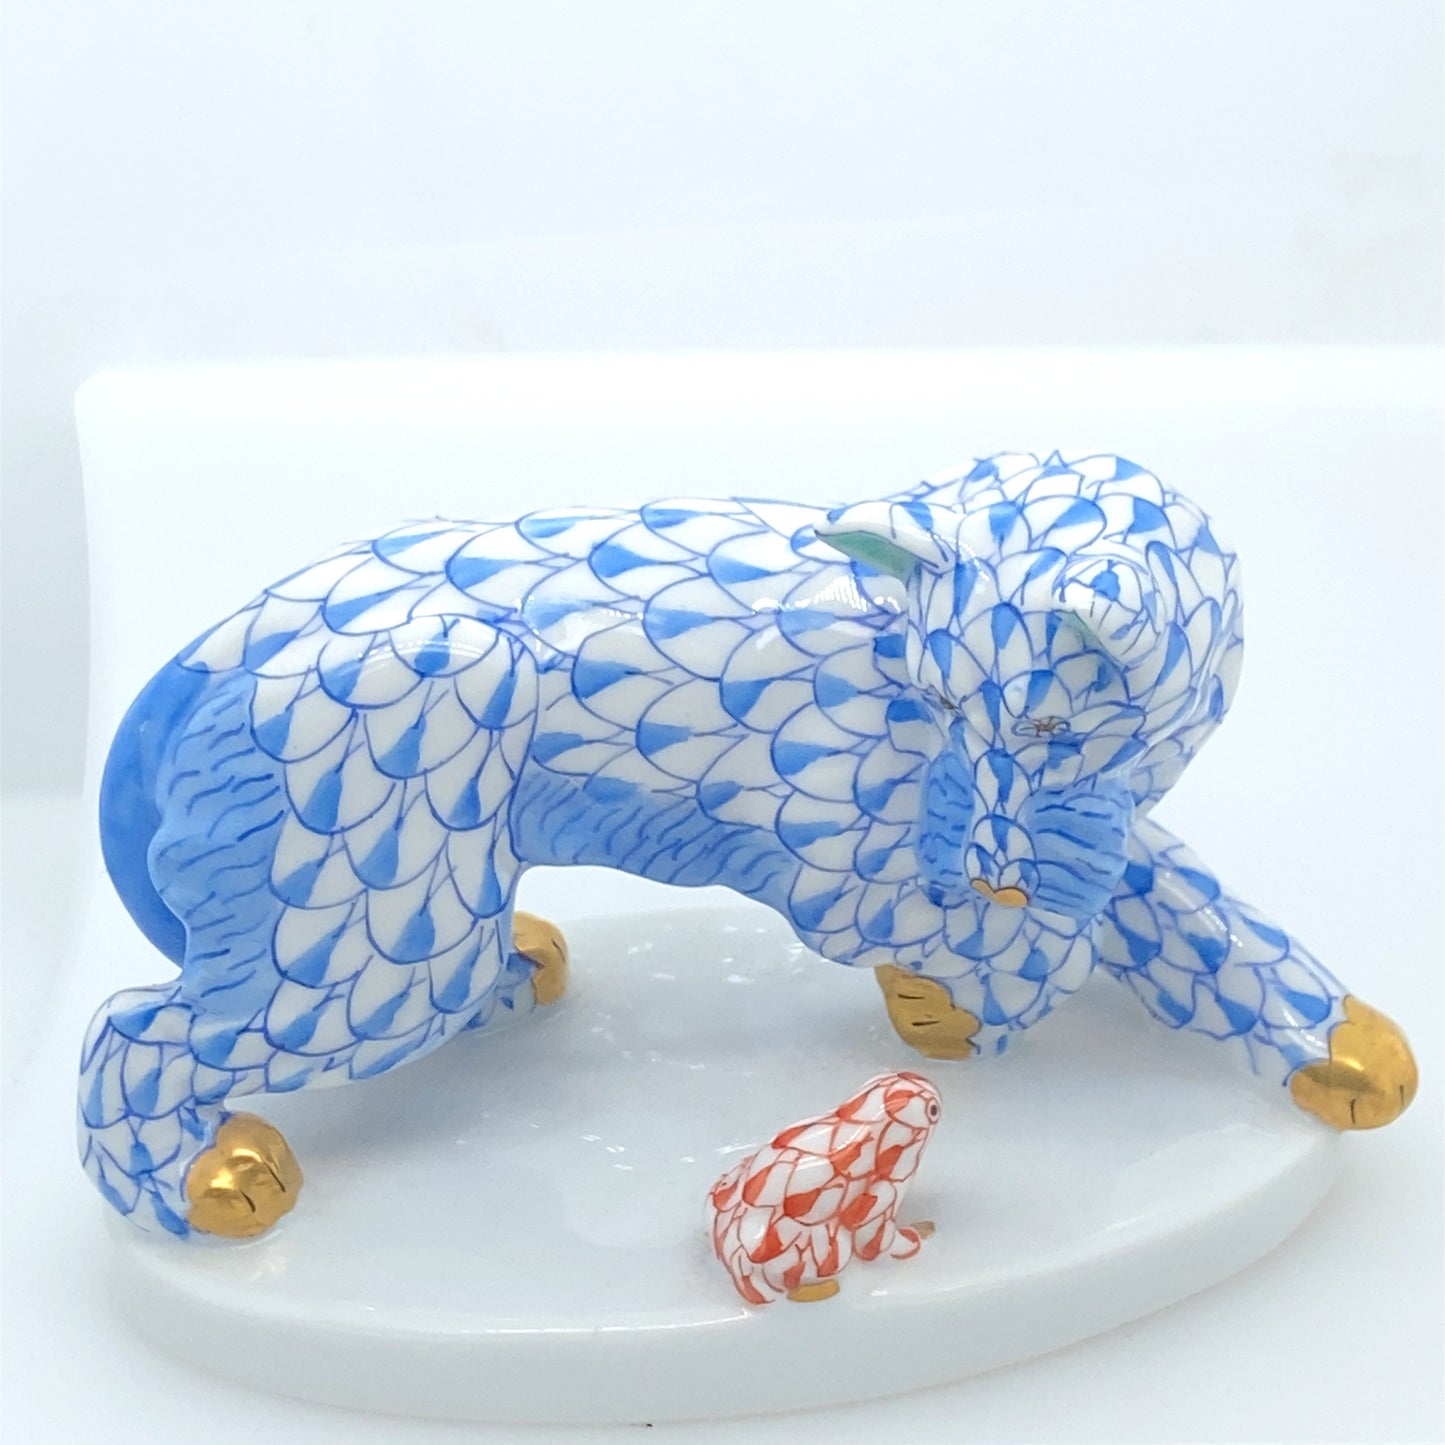 Herend from Hungary. Hand painted figurines.          Fox & frog design with gold.